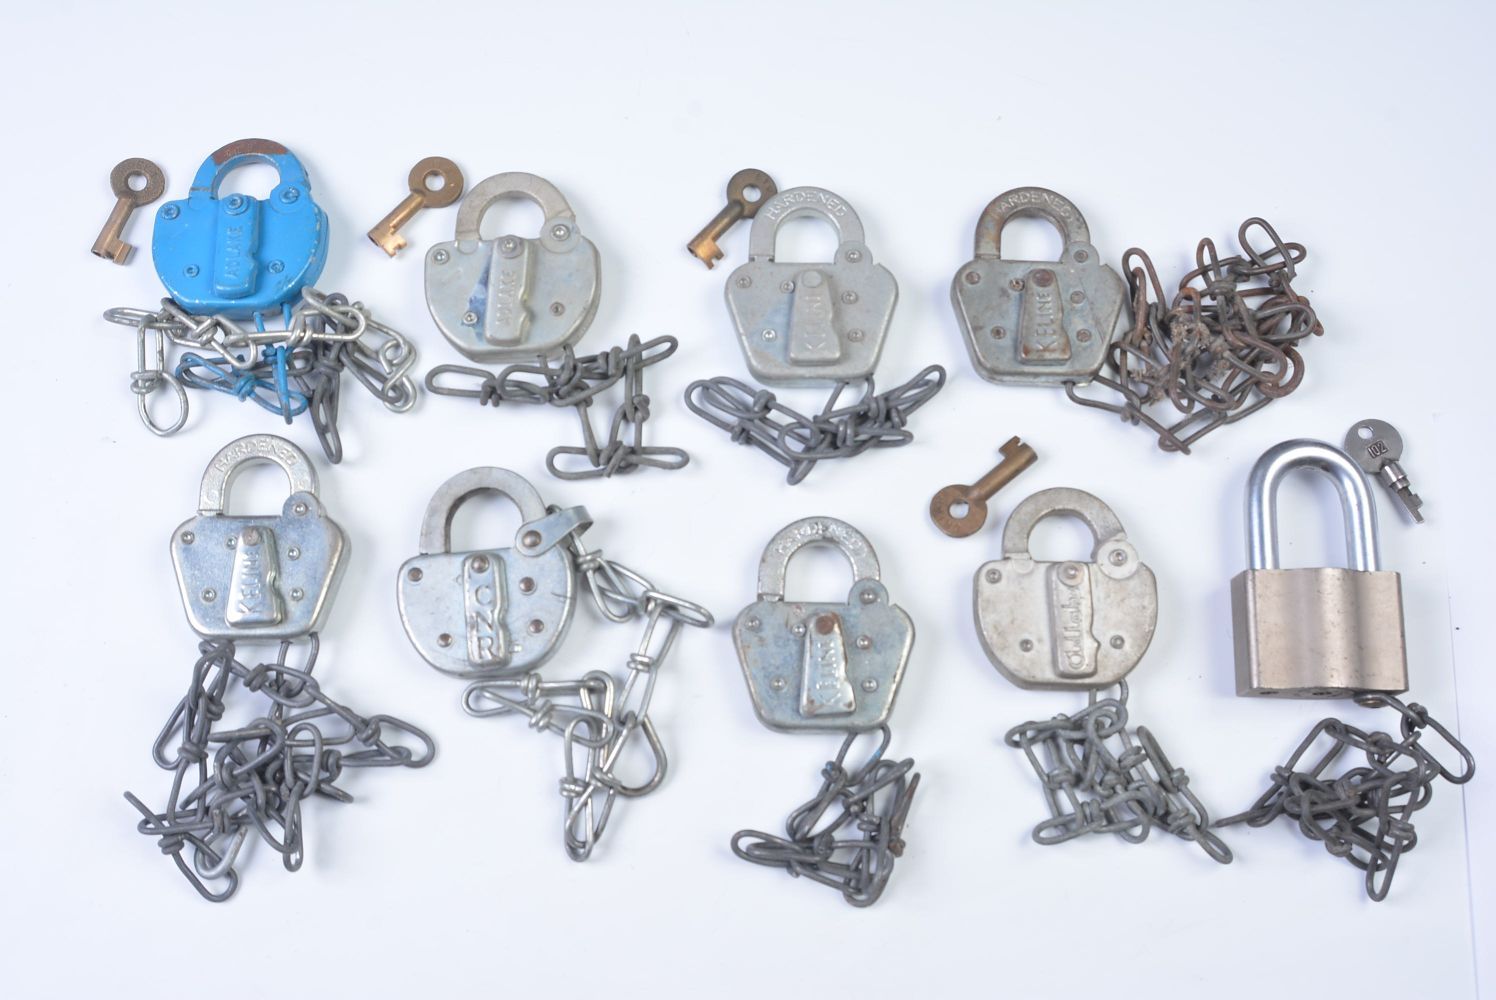 A COLLECTION OF PADLOCKS WITH RAILROAD MARKINGS